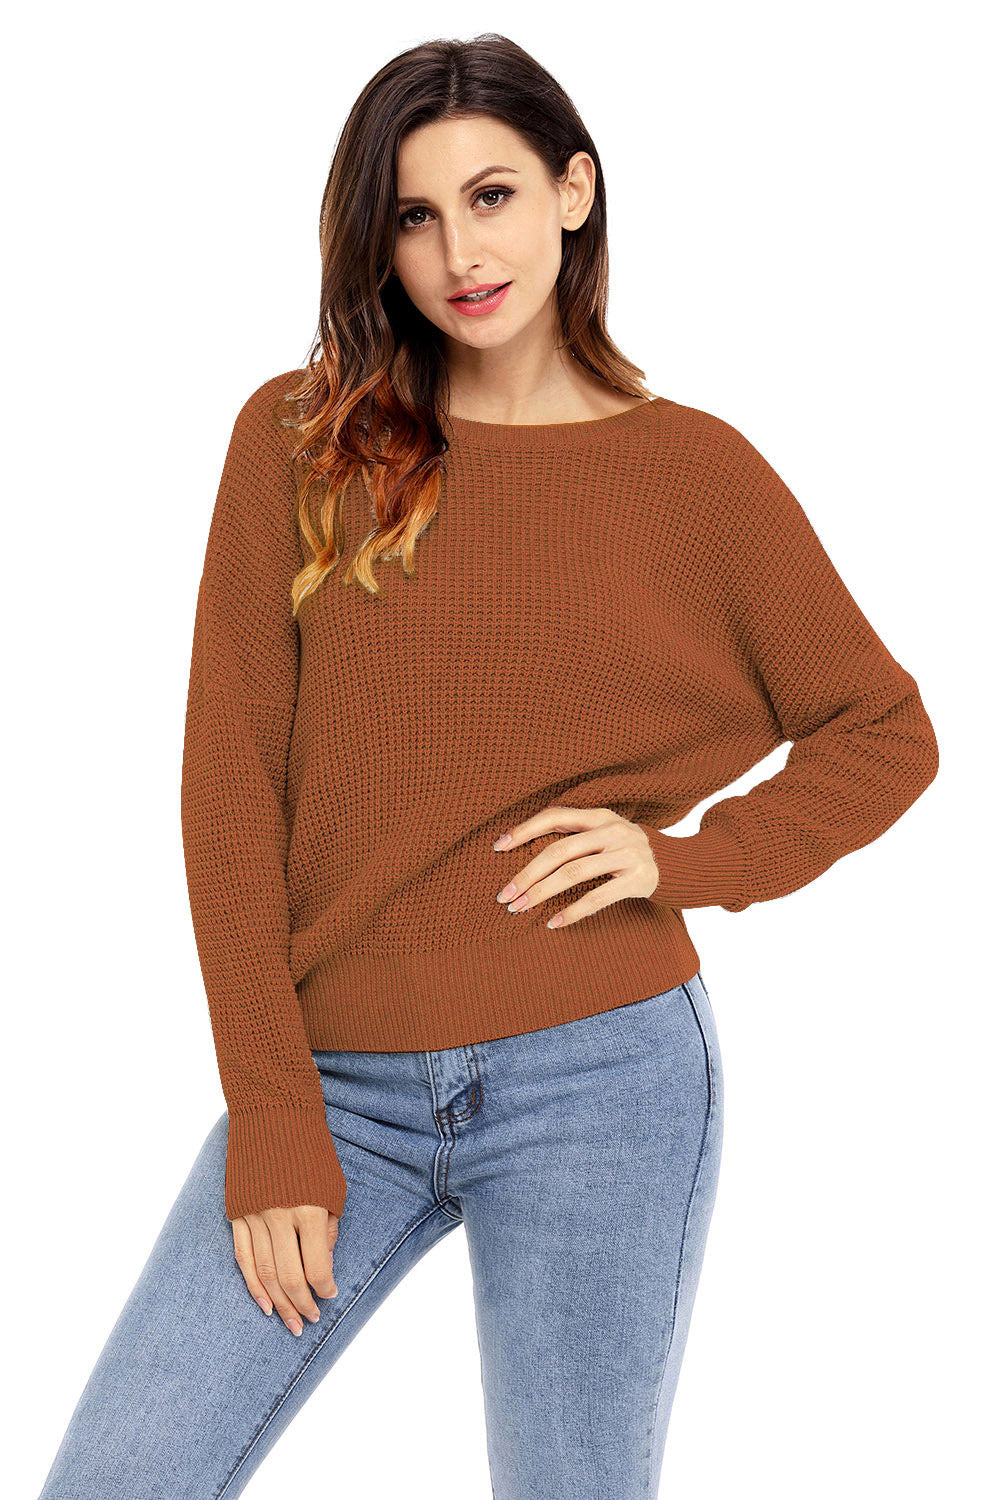 Gray Cross Back Hollow-out Sweater